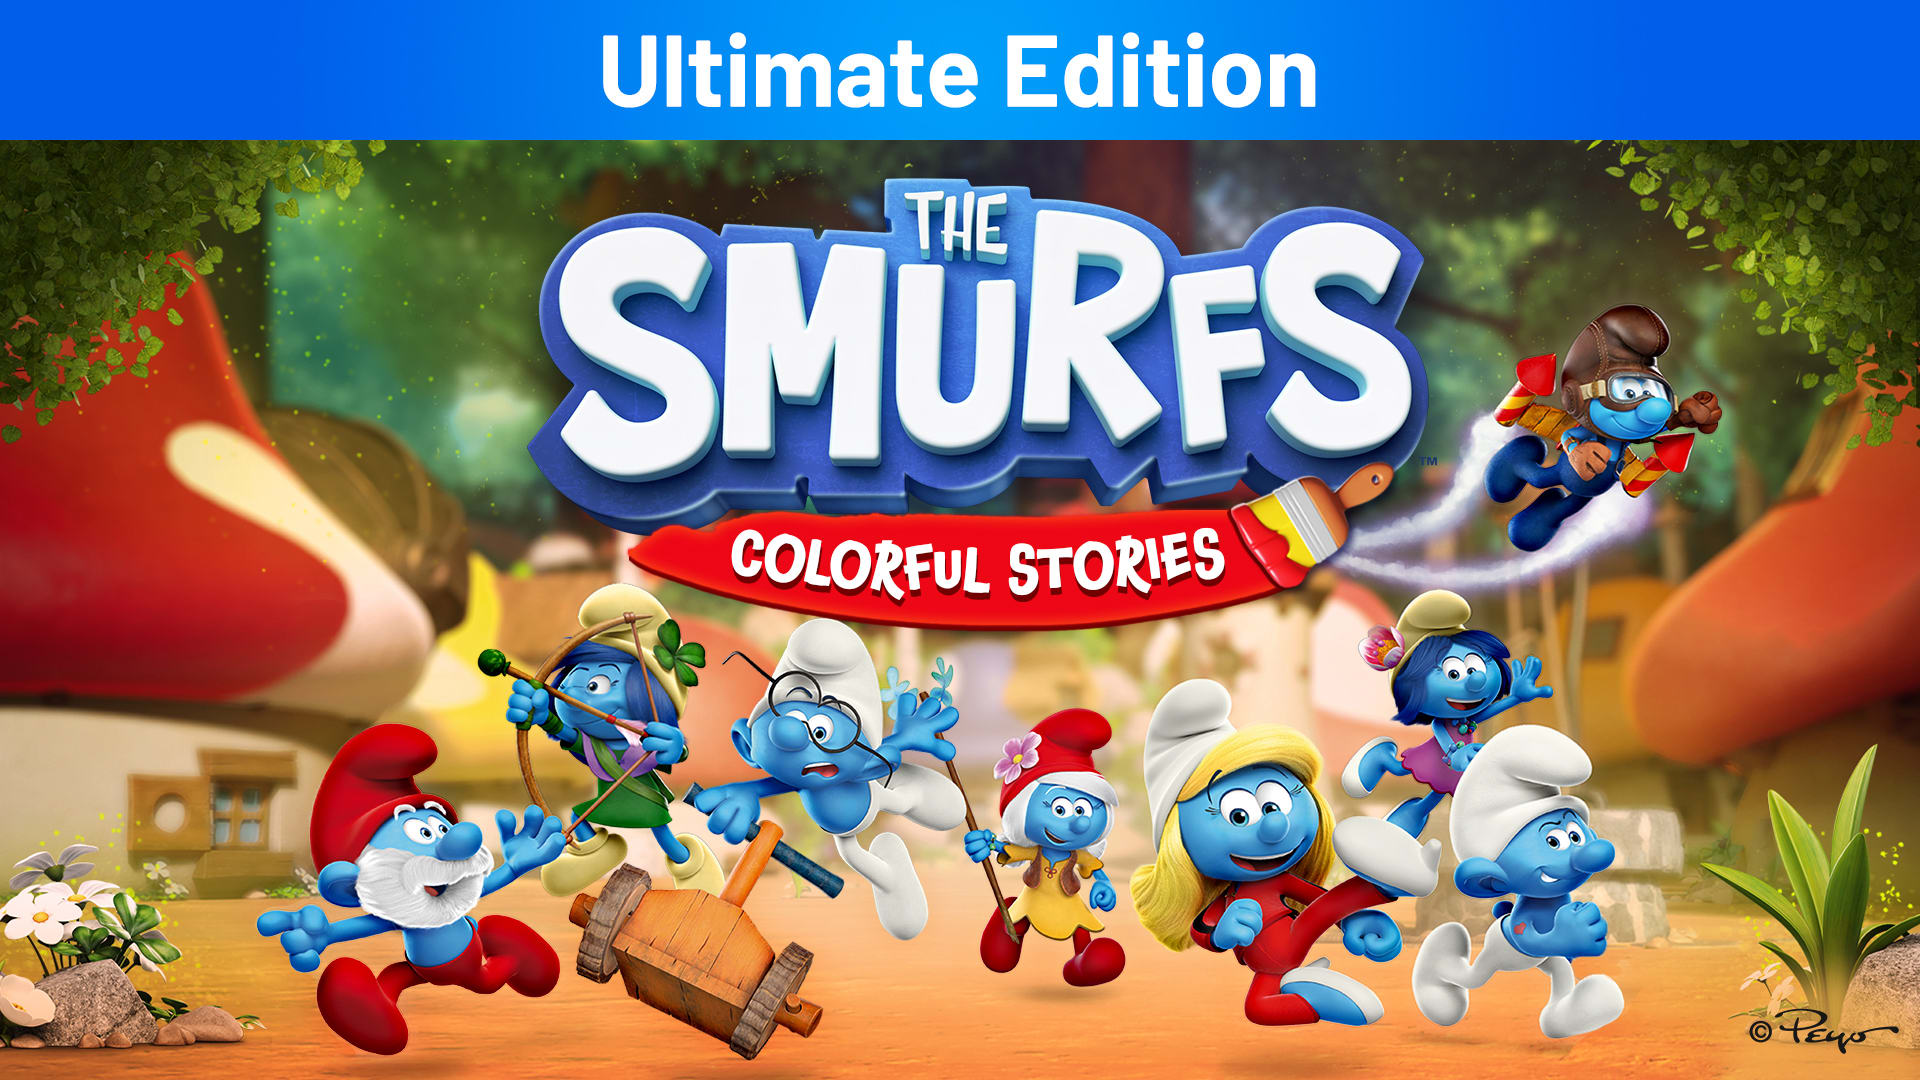 The Smurfs: Colorful Stories Ultimate Edition